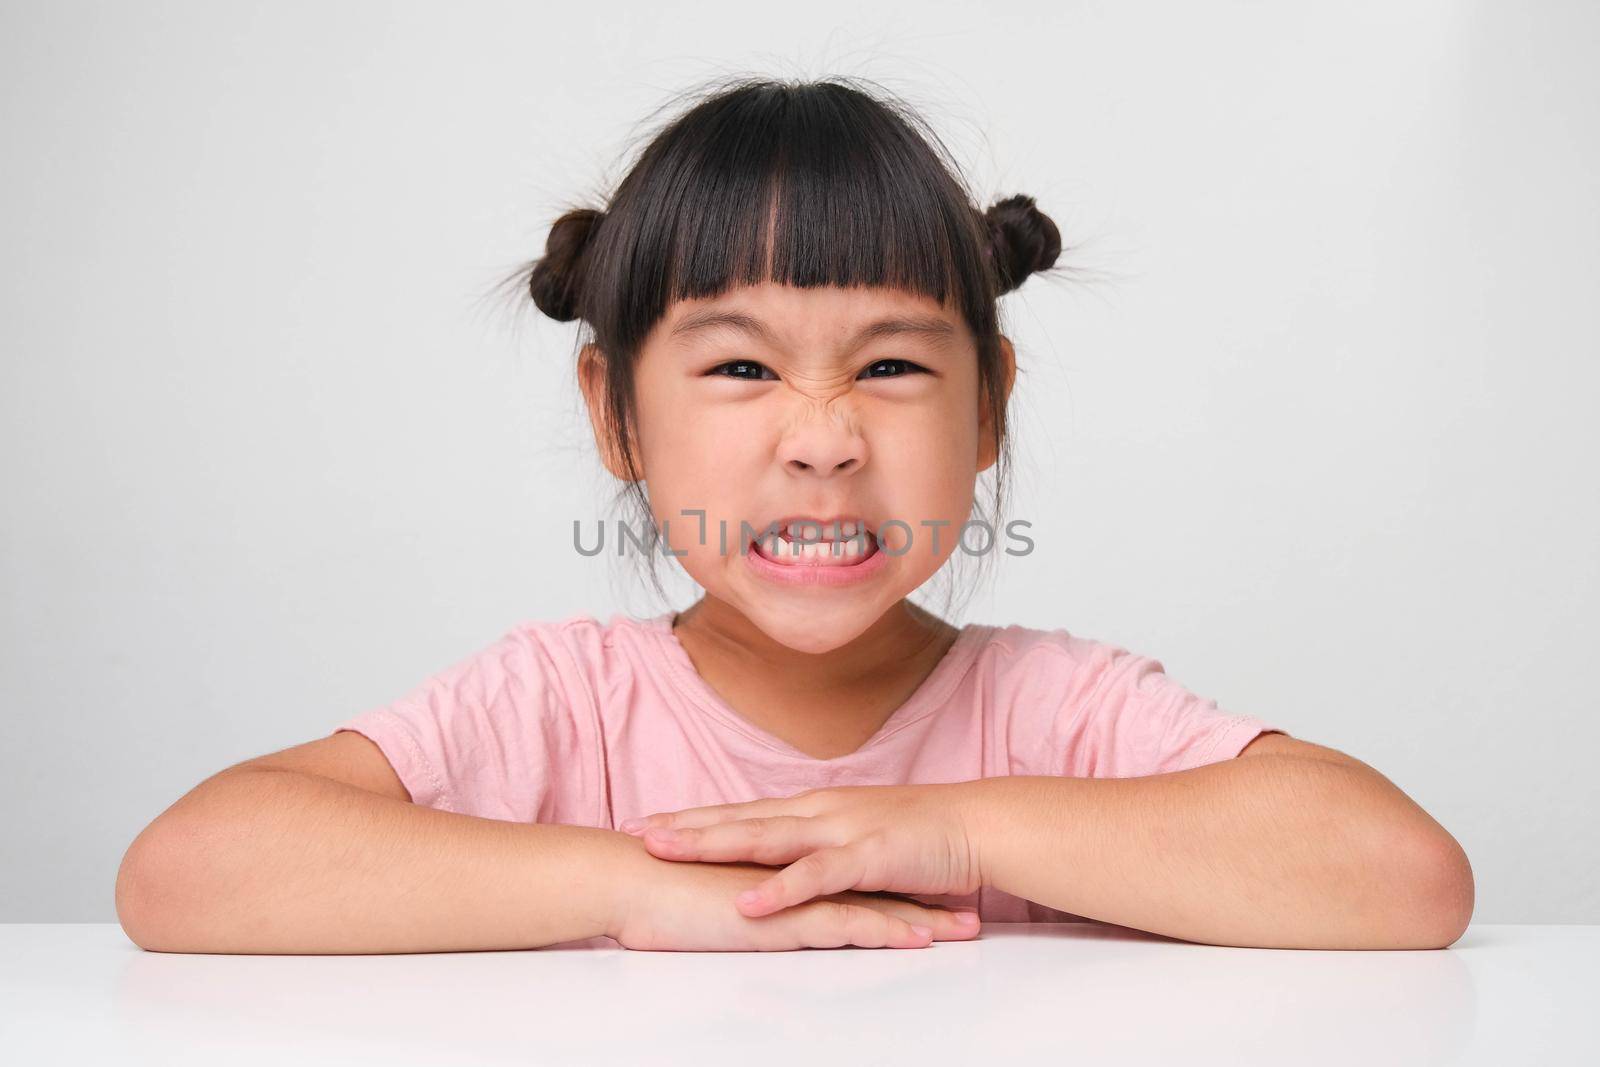 Cute dark haired little girl with angry face sitting at a table on a white background and looking at the camera.